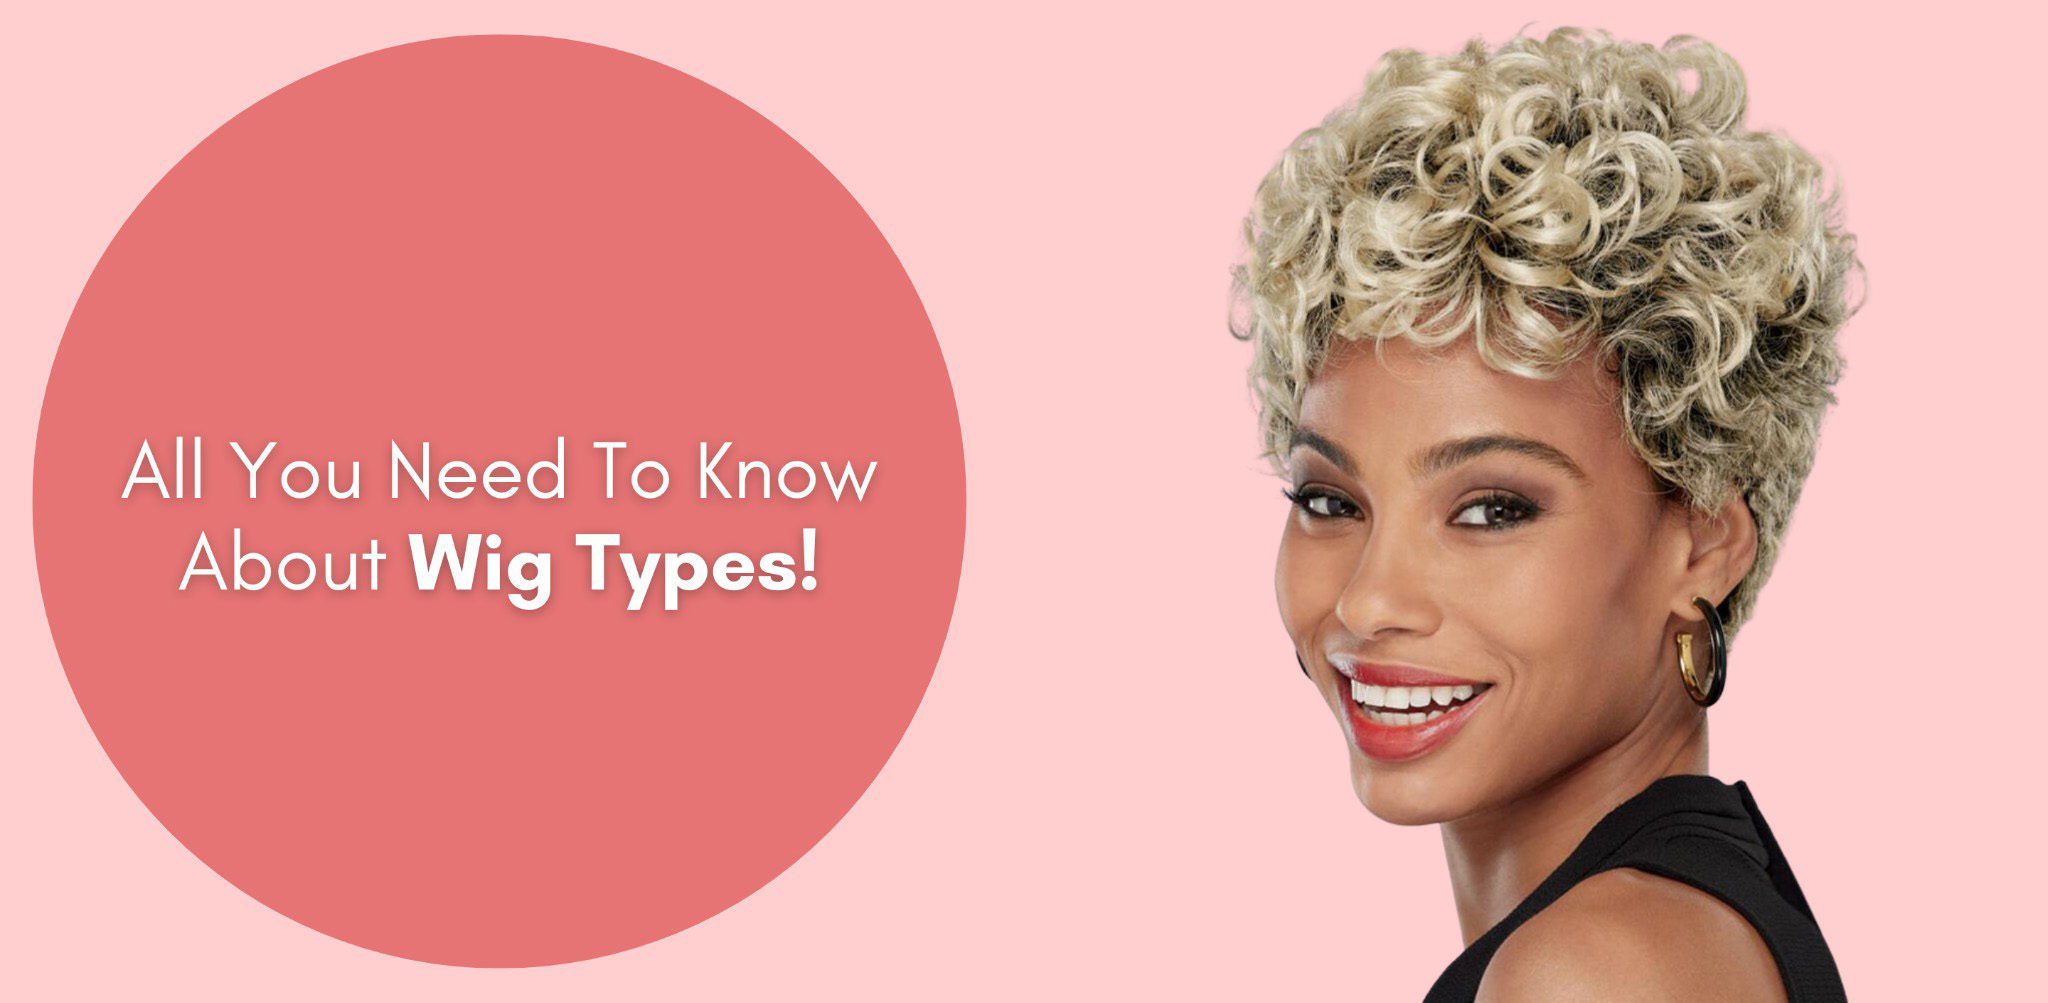 All You Need To Know About Wig Types!